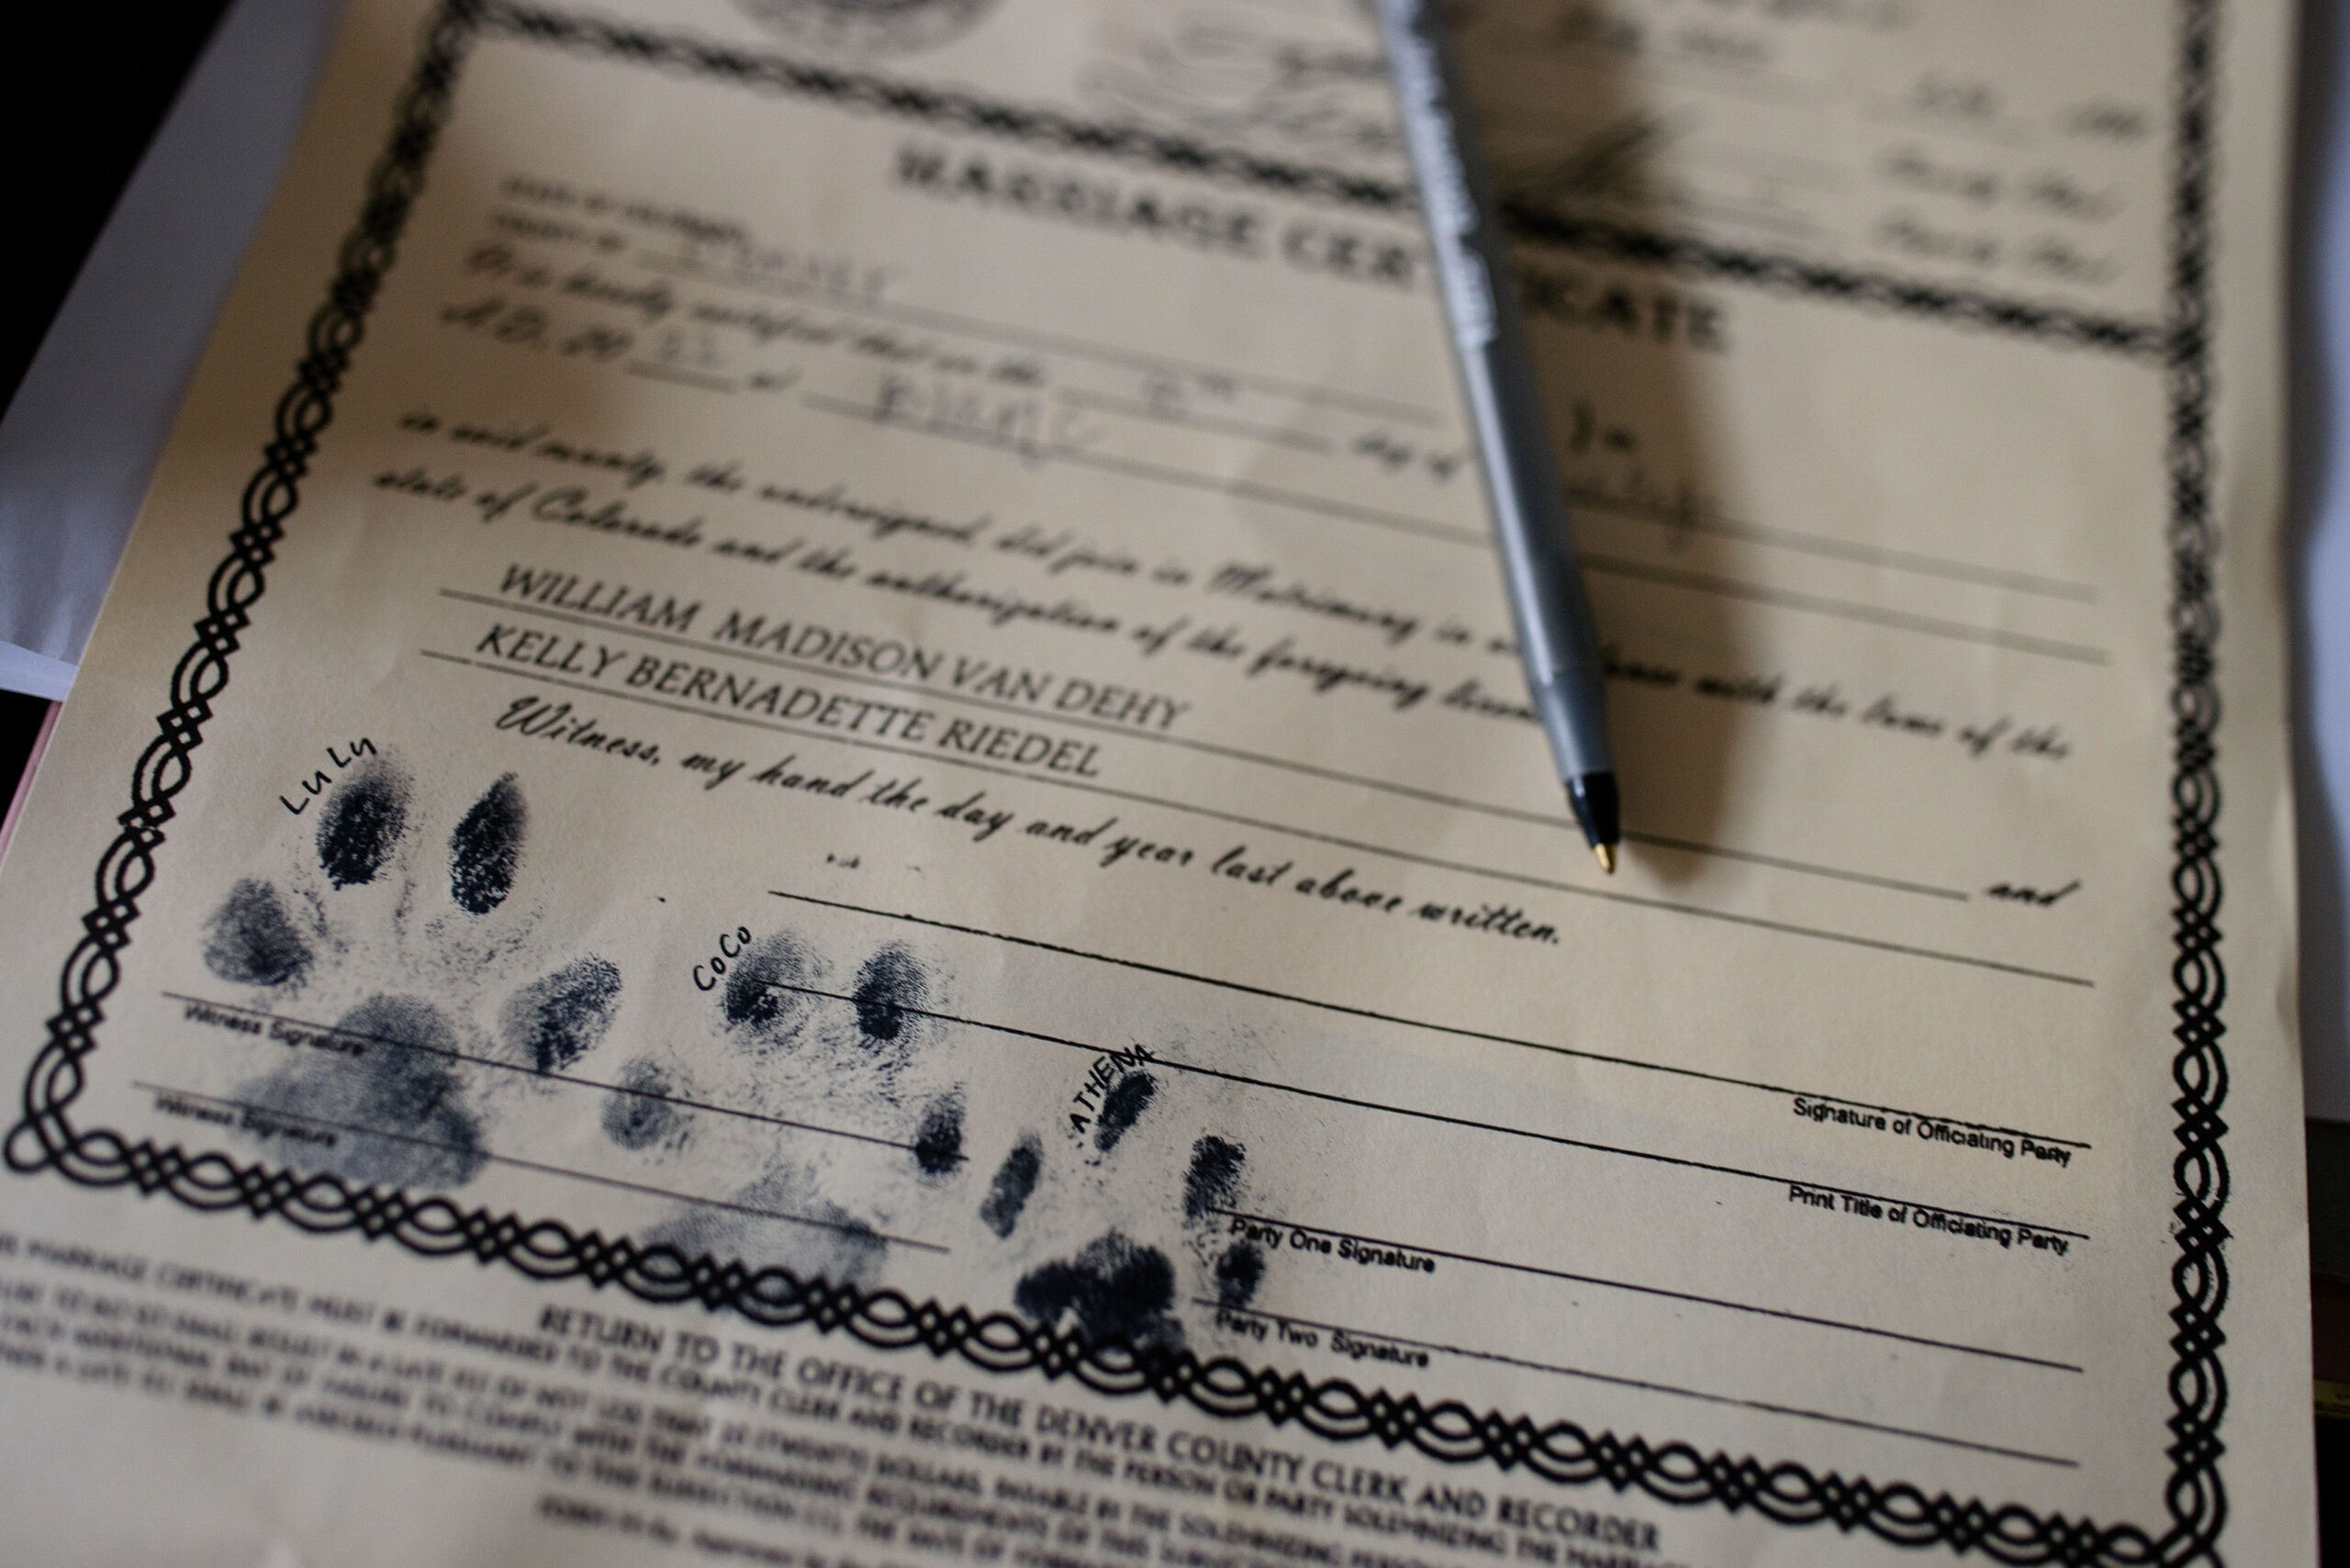 A detail of the couple’s animal prints on the marrige license